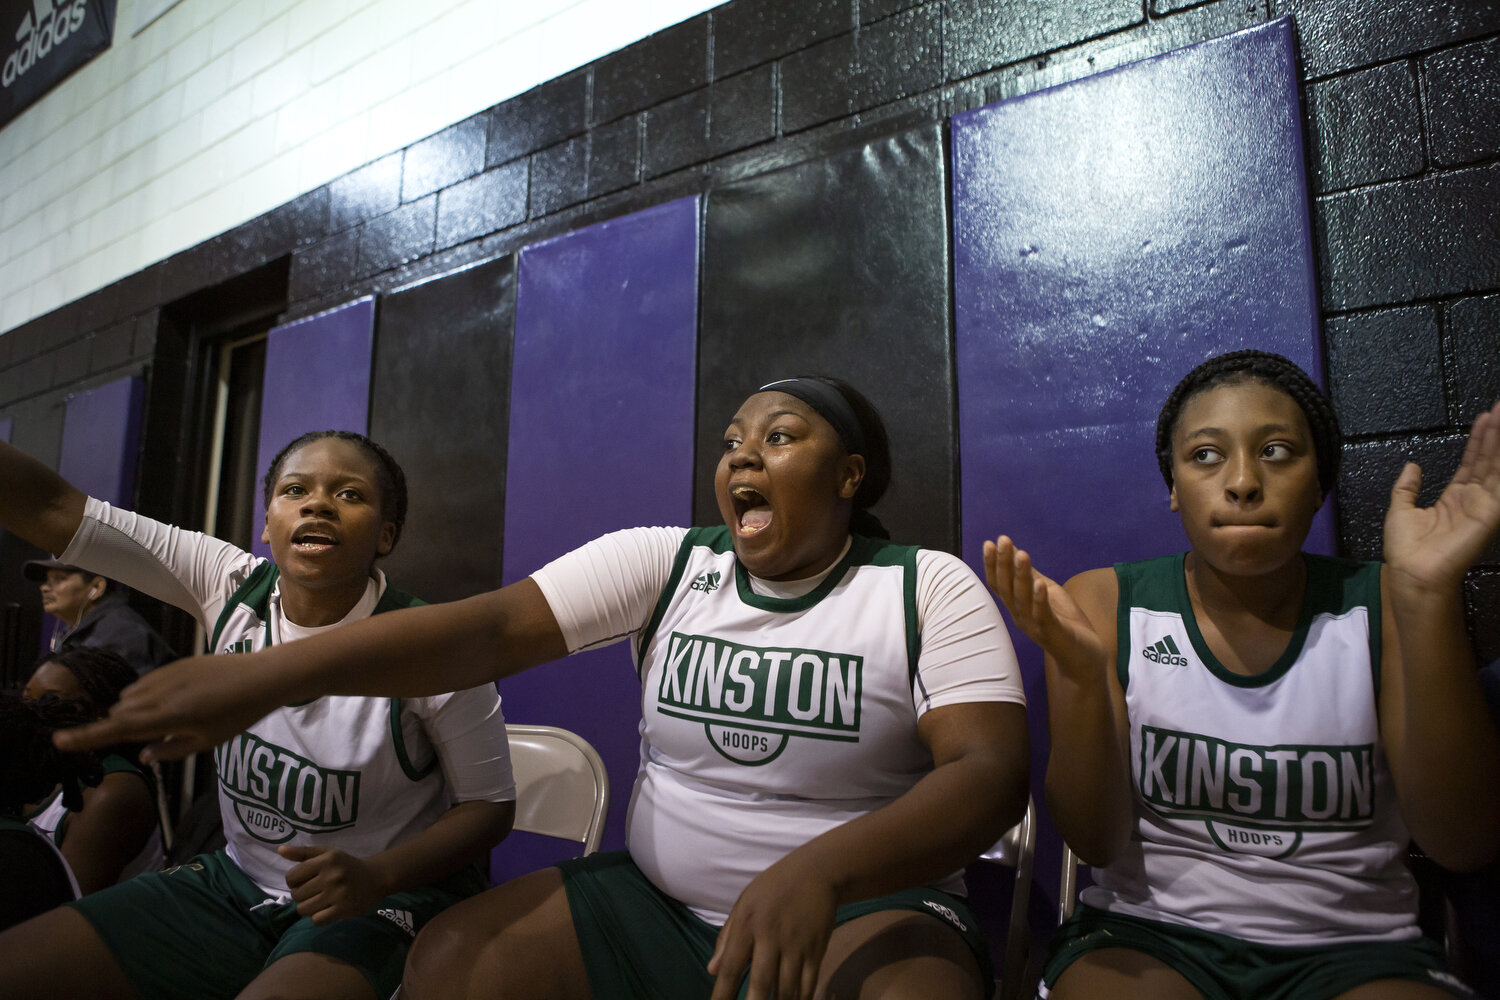  (Left to right) Sheriece Jones, Zykia Andrews, and Quiaira Powell cheer for their teammates during a jamboree hosted by Kinston.  